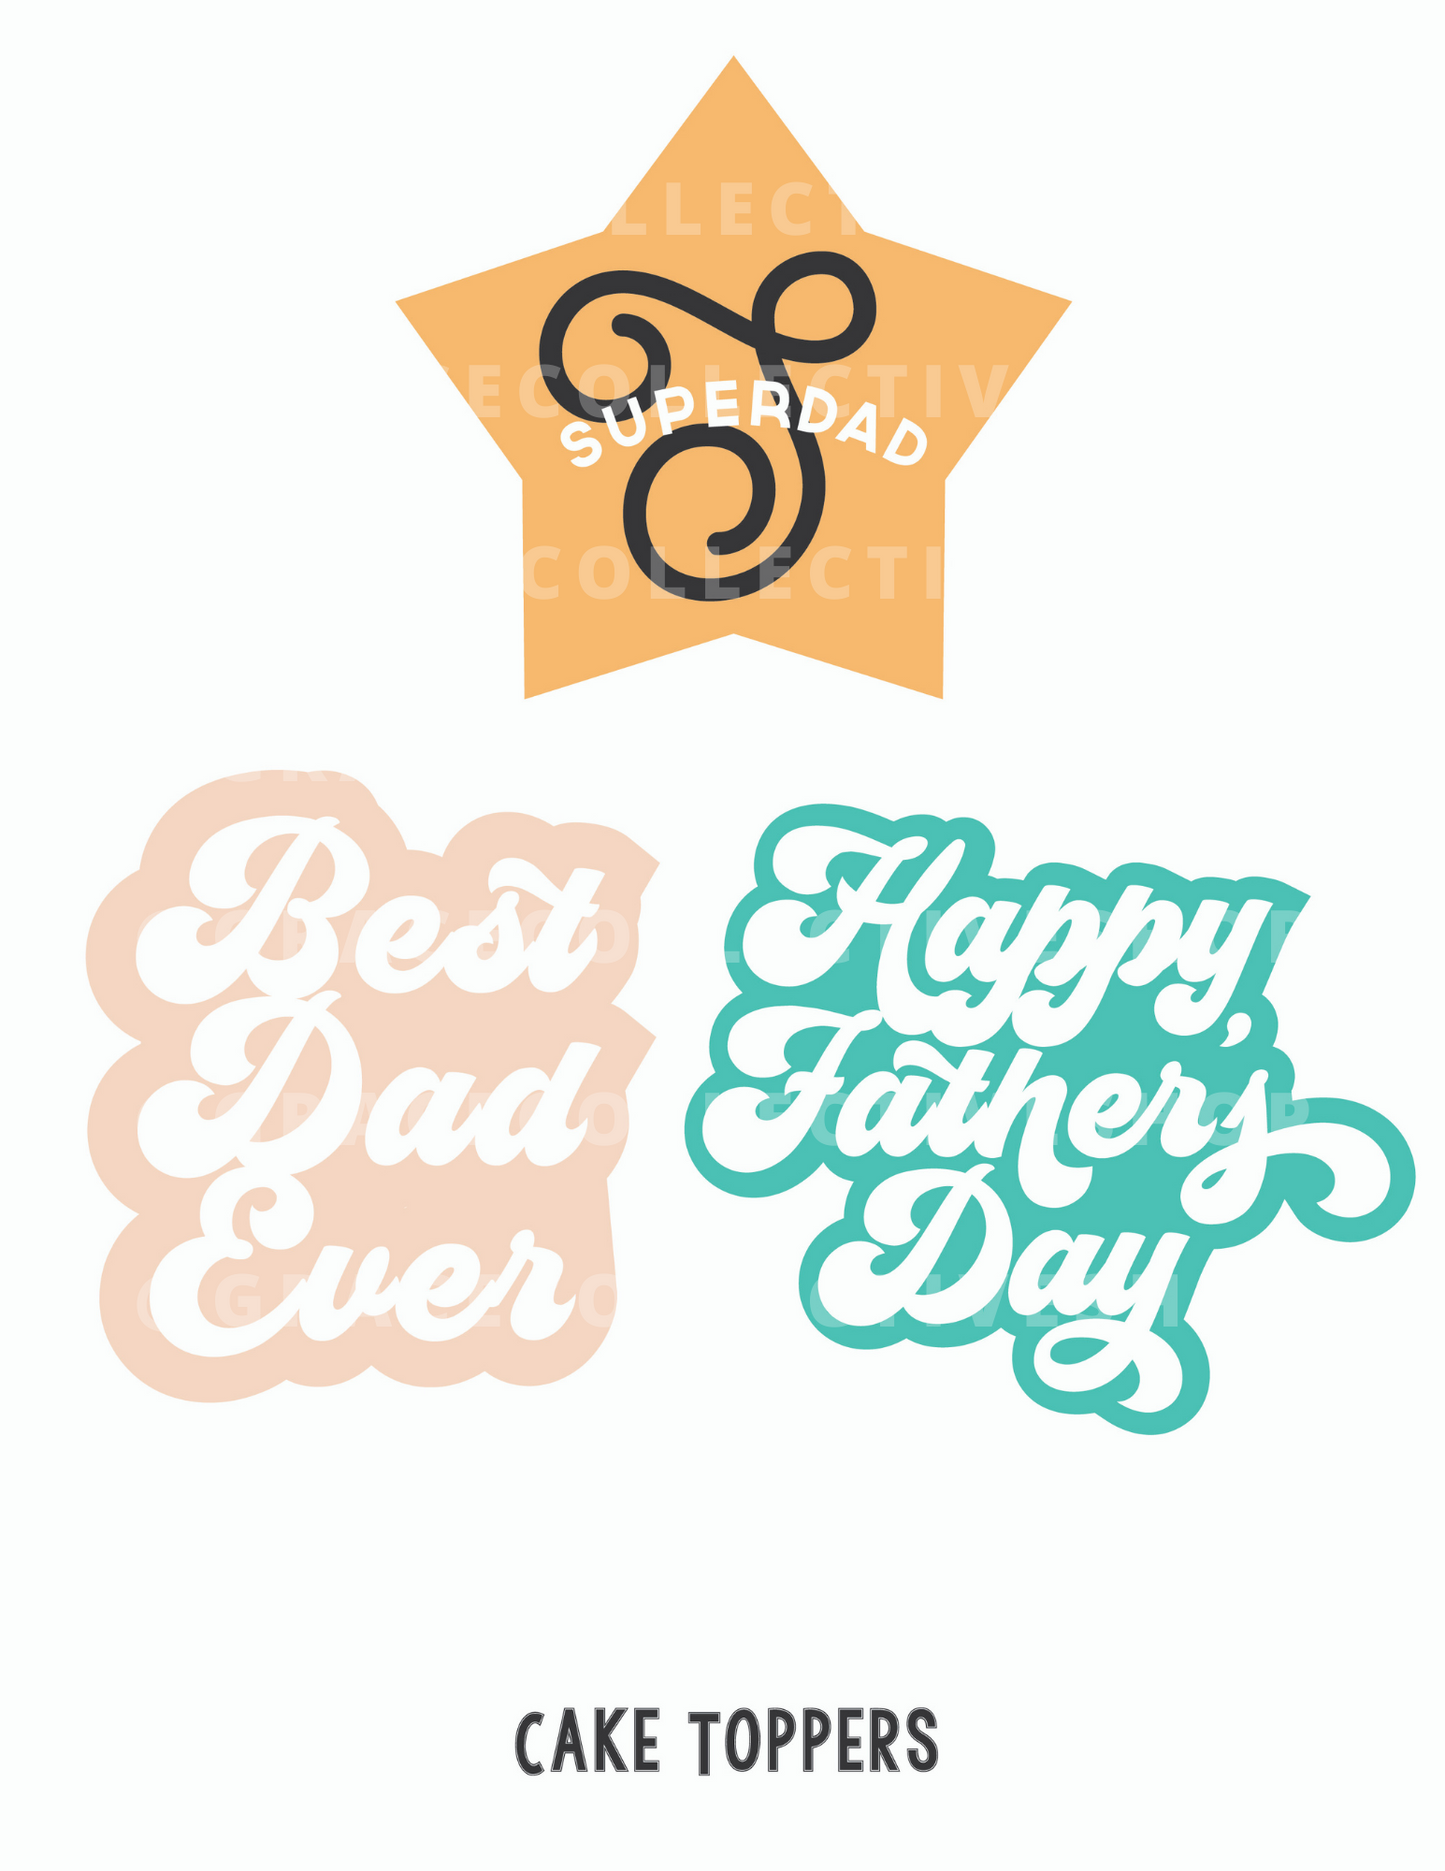 Father's Day | Activity Set